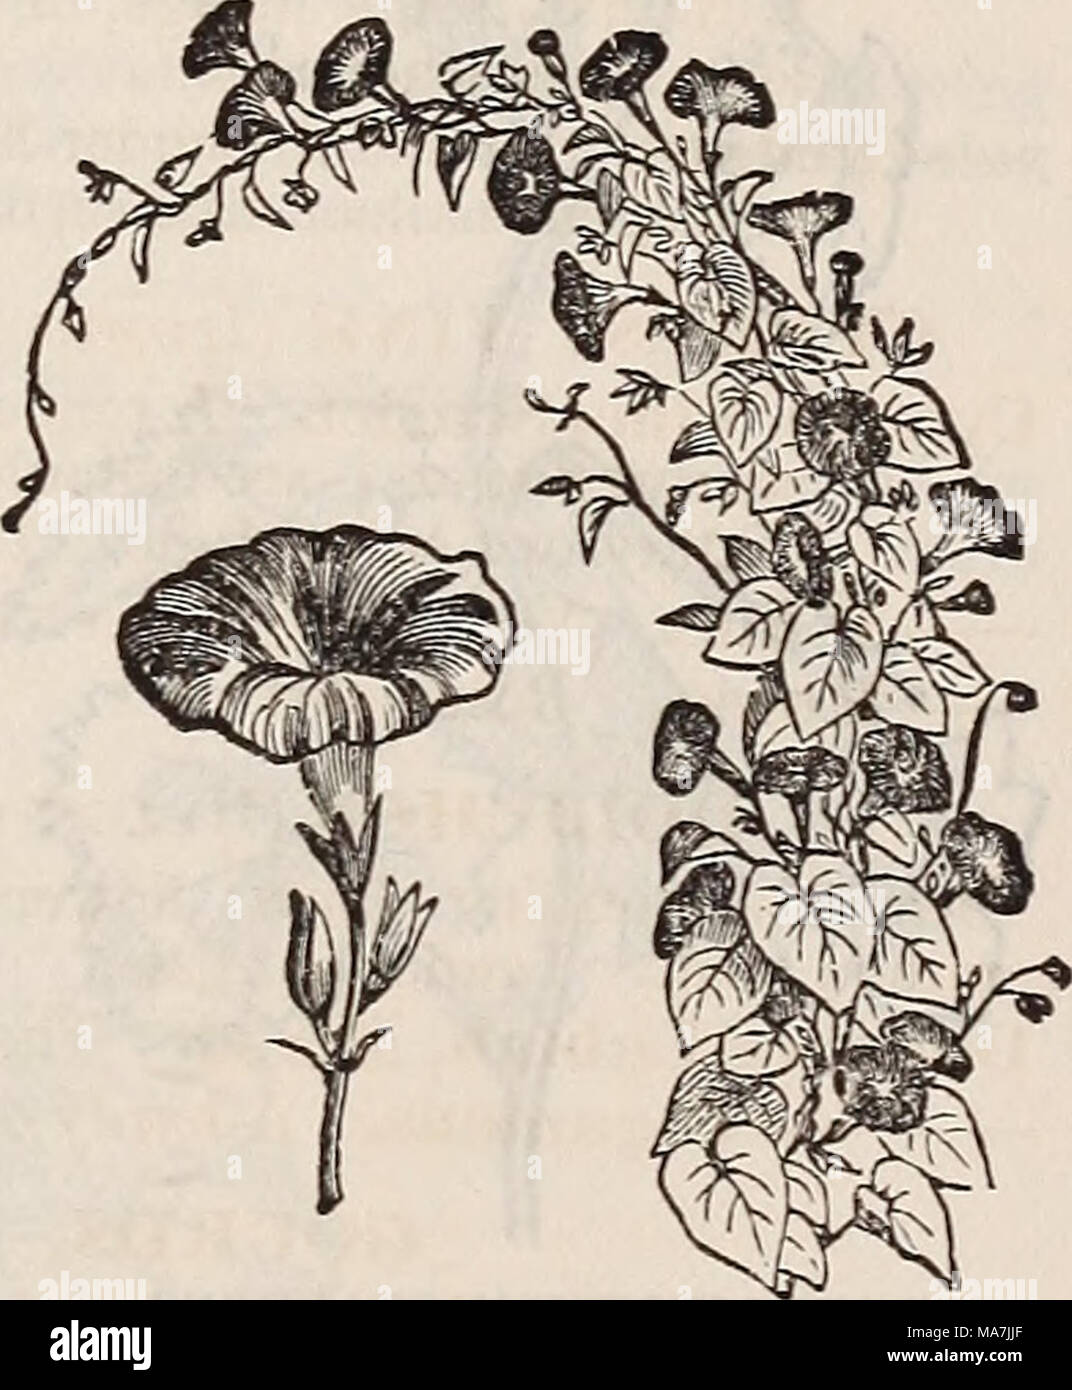 . E. Fred Washburn's amateur cultivator's guide to the flower &amp; kitchen garden for 1880 . THUNBERGIA AI.ATA (see page 79), IPOM^A VOIitJBILIS (aiADAME AlfNE). NEW IPOM/EAS, WITH SELF-COLORED FOLIAGE. 820 Ipomgea Hederacea Alba Grandiflora Intus Rosea. Handsome white flower, with dark-rose throat 821 Alba Grandiflora Intus Rosea Semi-Plena. Of the same form and color as the foregoing; a serai-double one, which is seldom seen in this family 822 Atrocarminea Grandiflora Azurea Marginata. With brilliant car- mine flowers, edged with clear azure-blue NEW IPOM/EAS, WITH VARIEGATED FOLIAGE. &quot Stock Photo